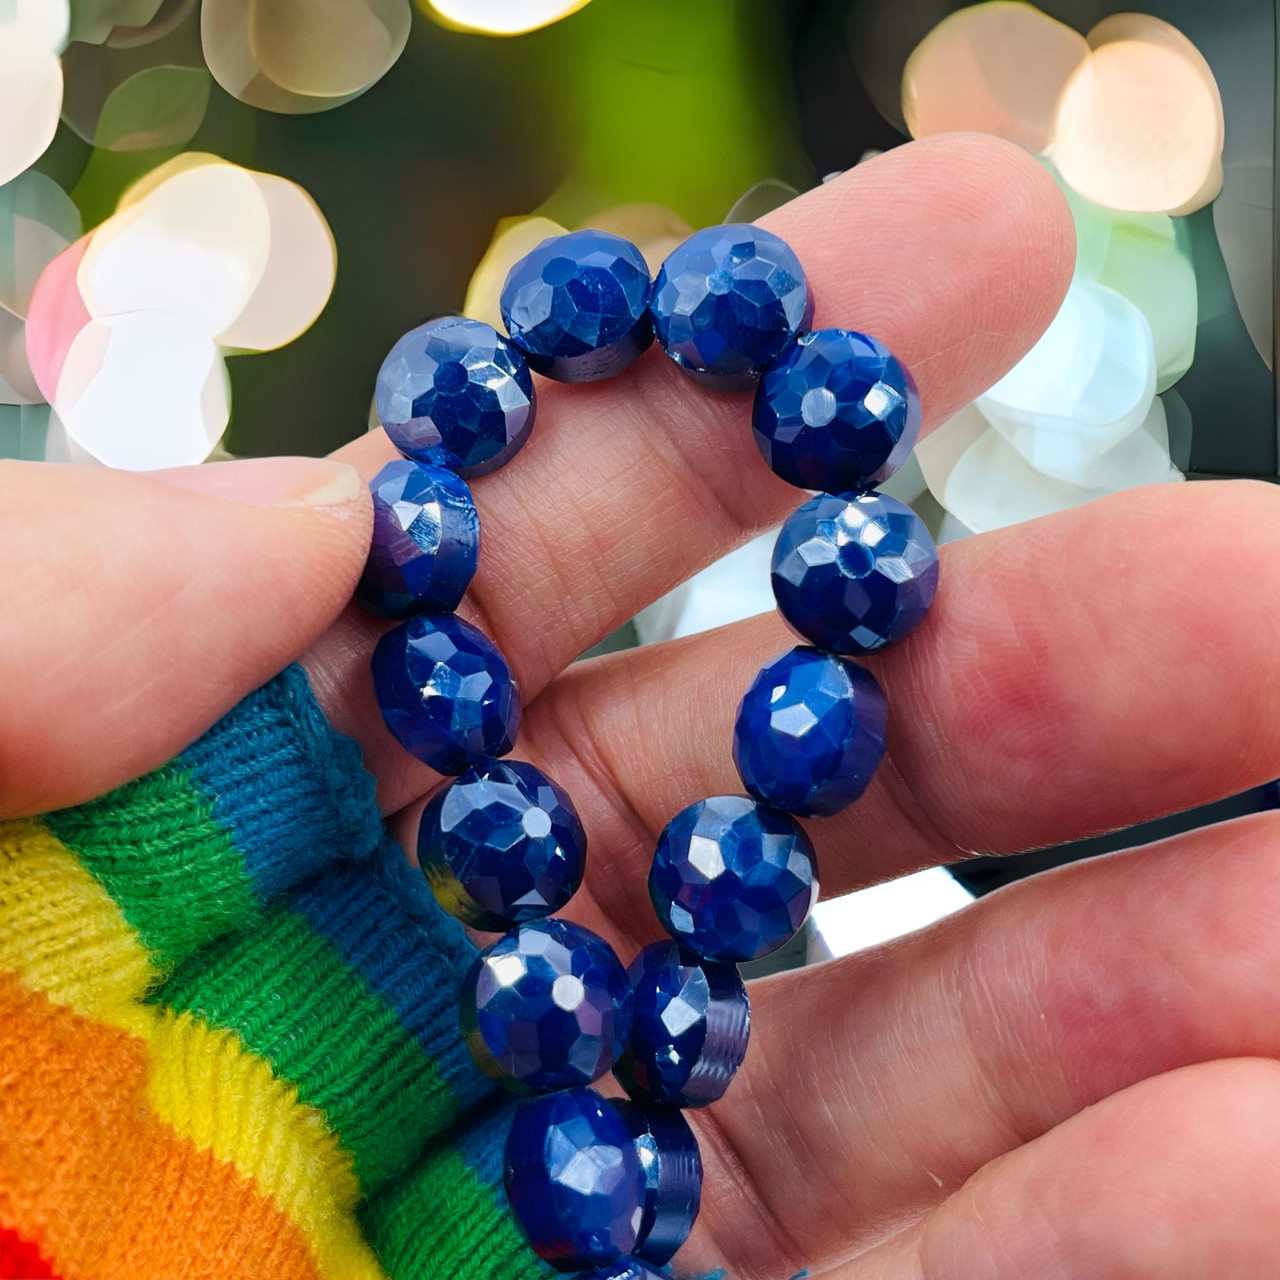 10mm Cobalt Blue Faceted Coin Beads (20 Beads)